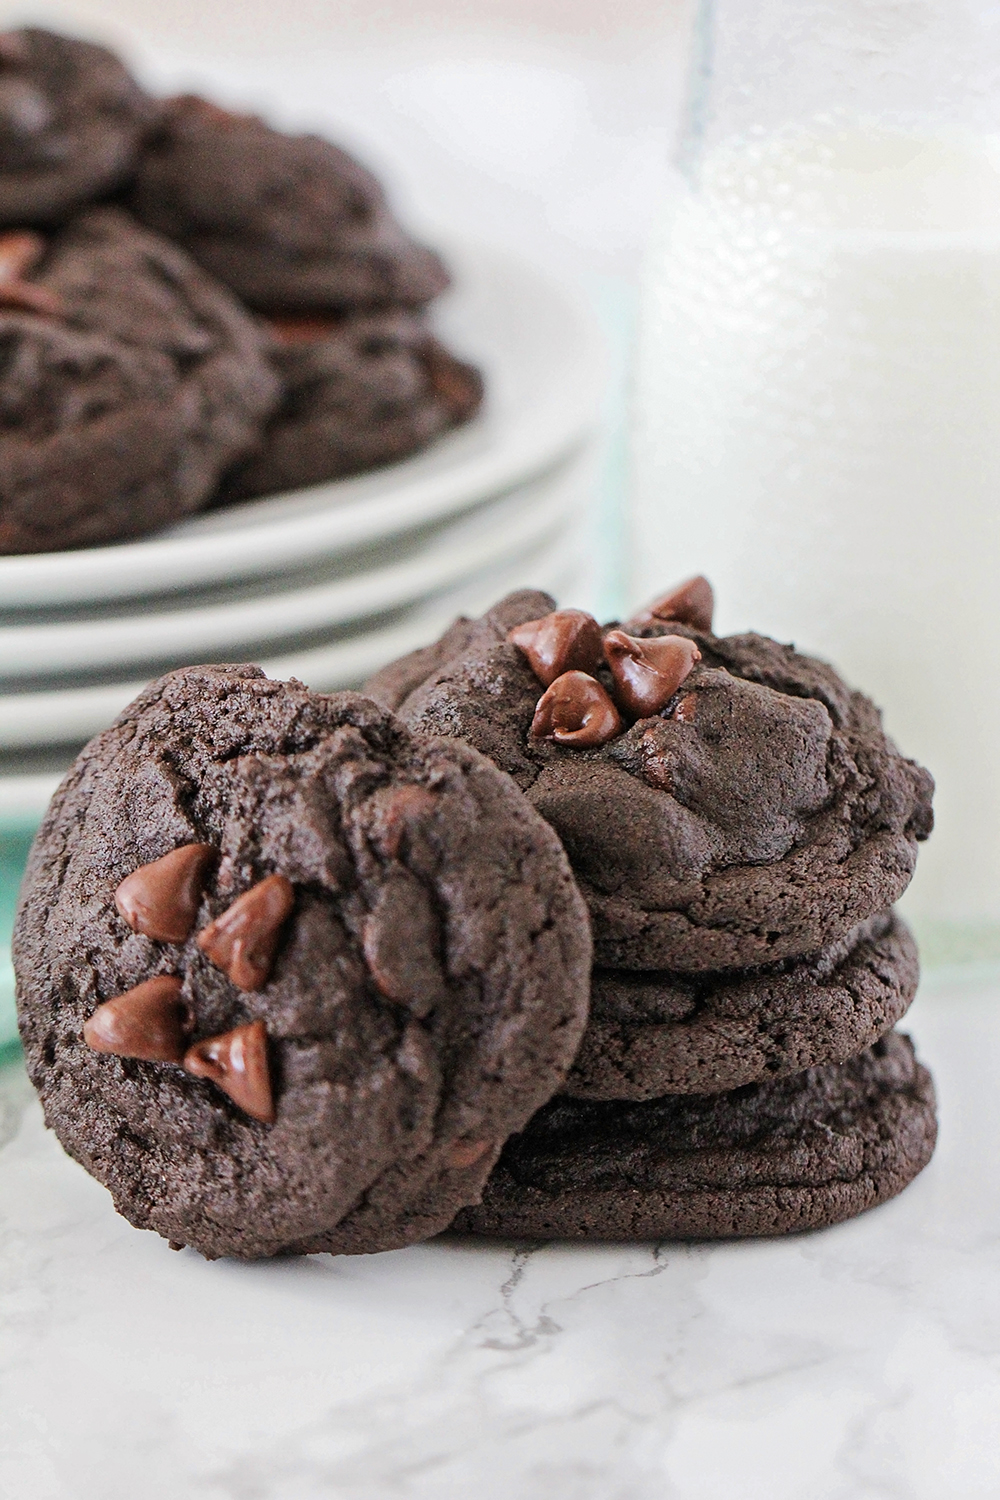 These rich and decadent fudgy double chocolate cookies are the perfect way to satisfy your chocolate craving!